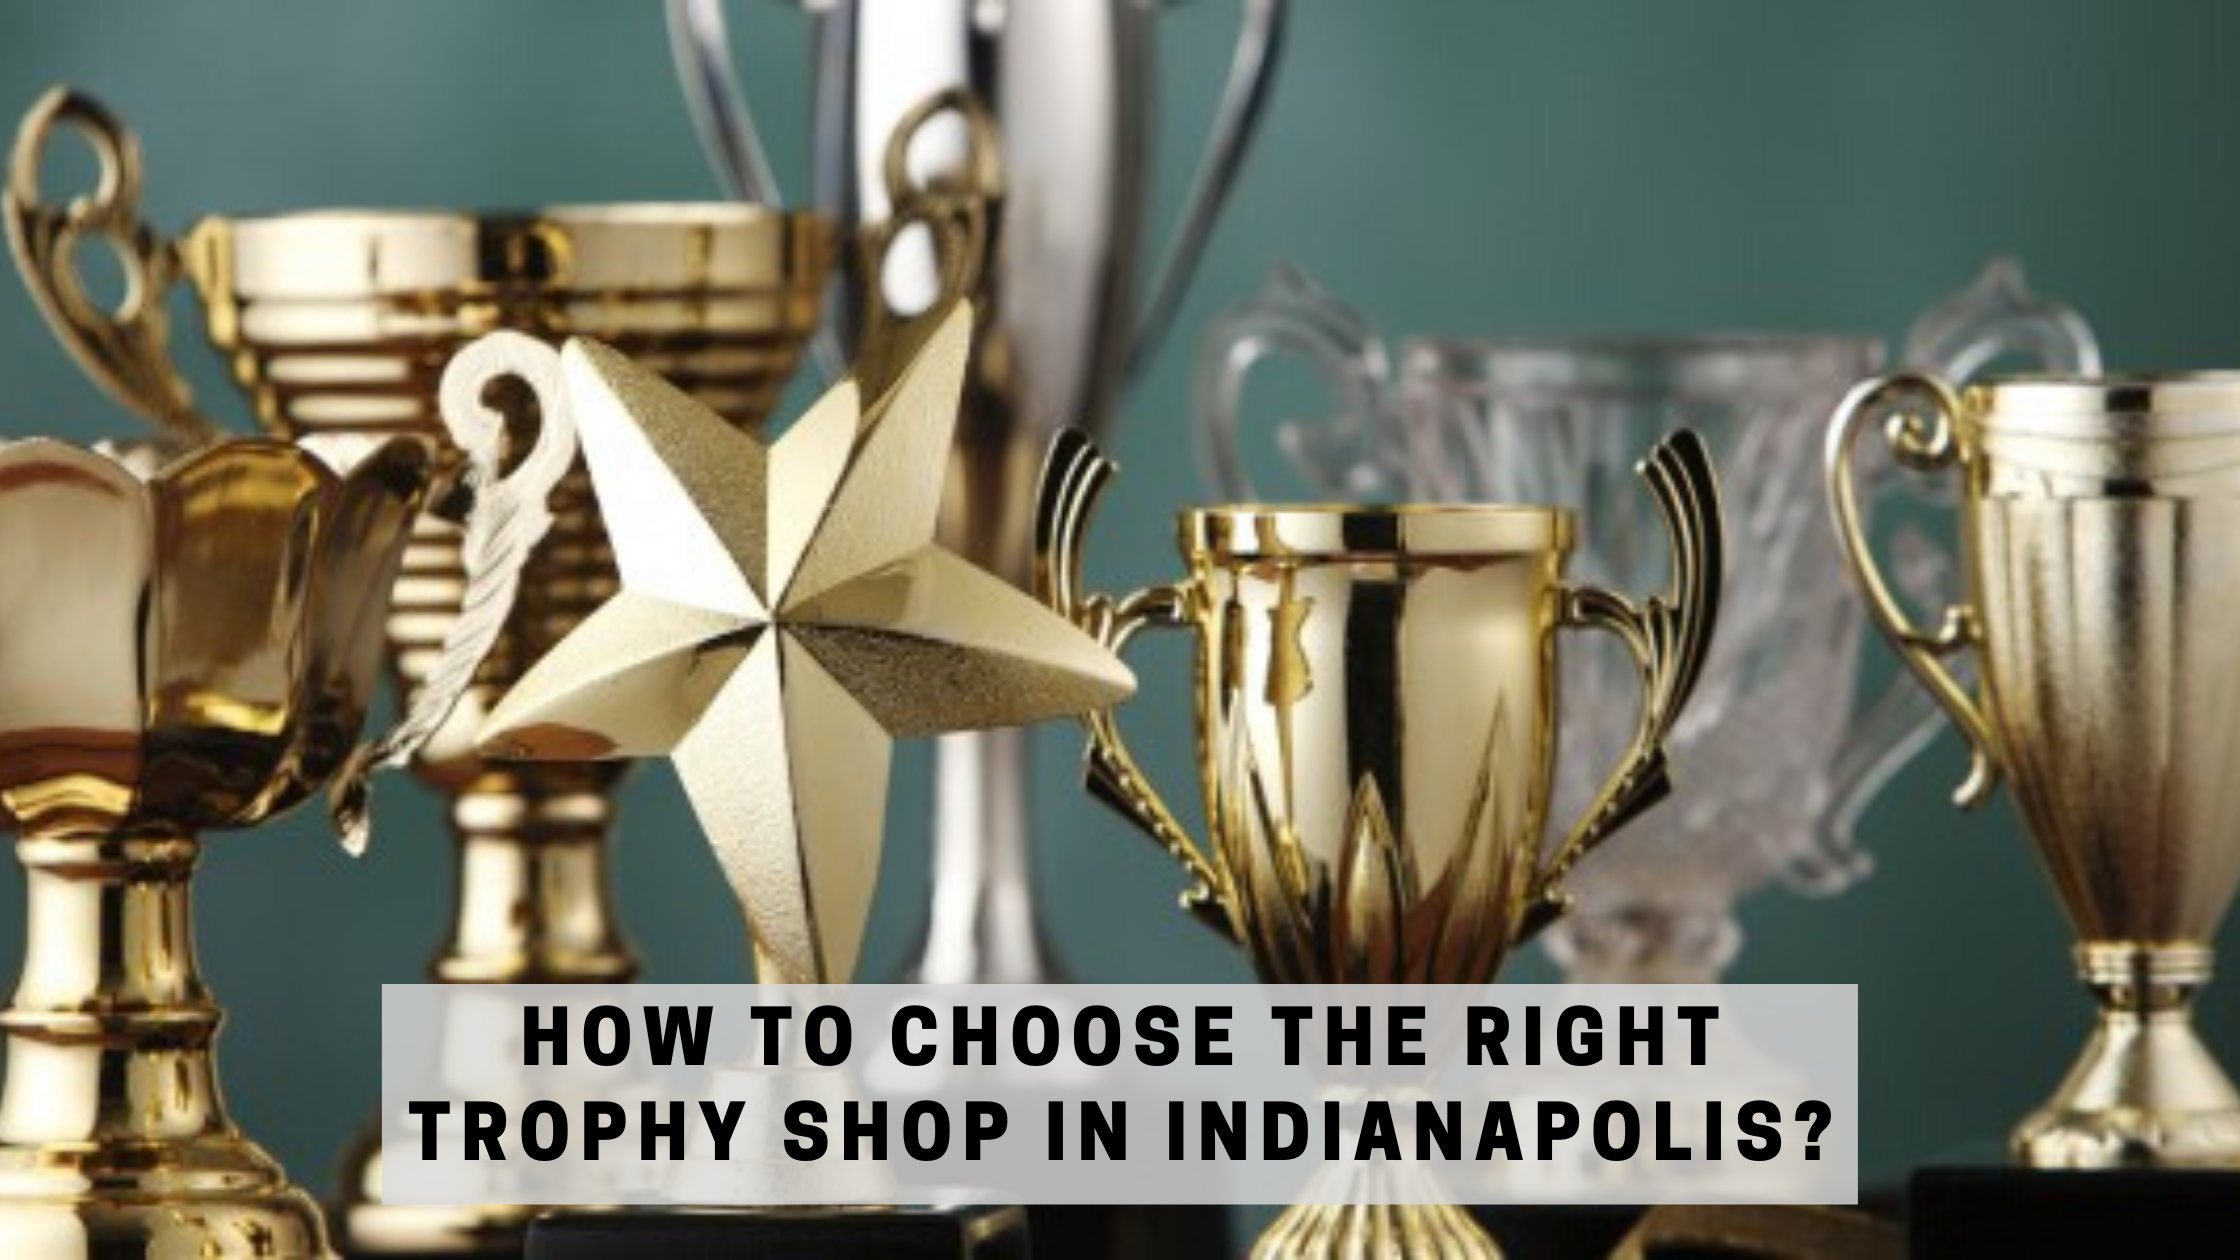 How to Choose the Right Trophy Shop in Indianapolis?